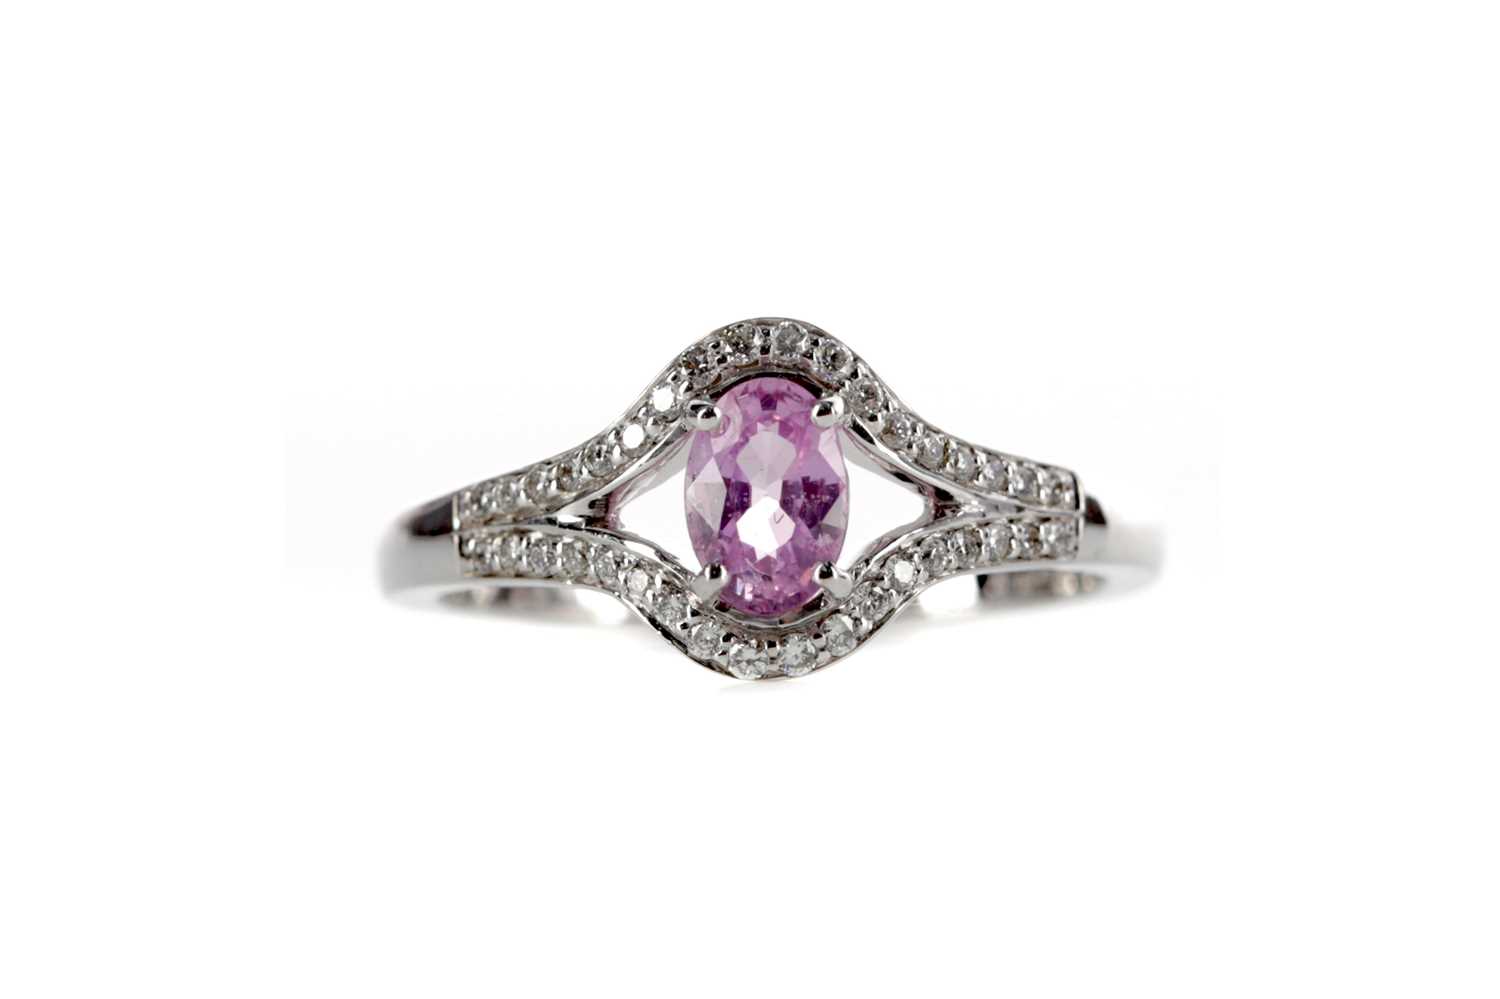 Lot 411 - A PINK SAPPHIRE AND DIAMOND RING